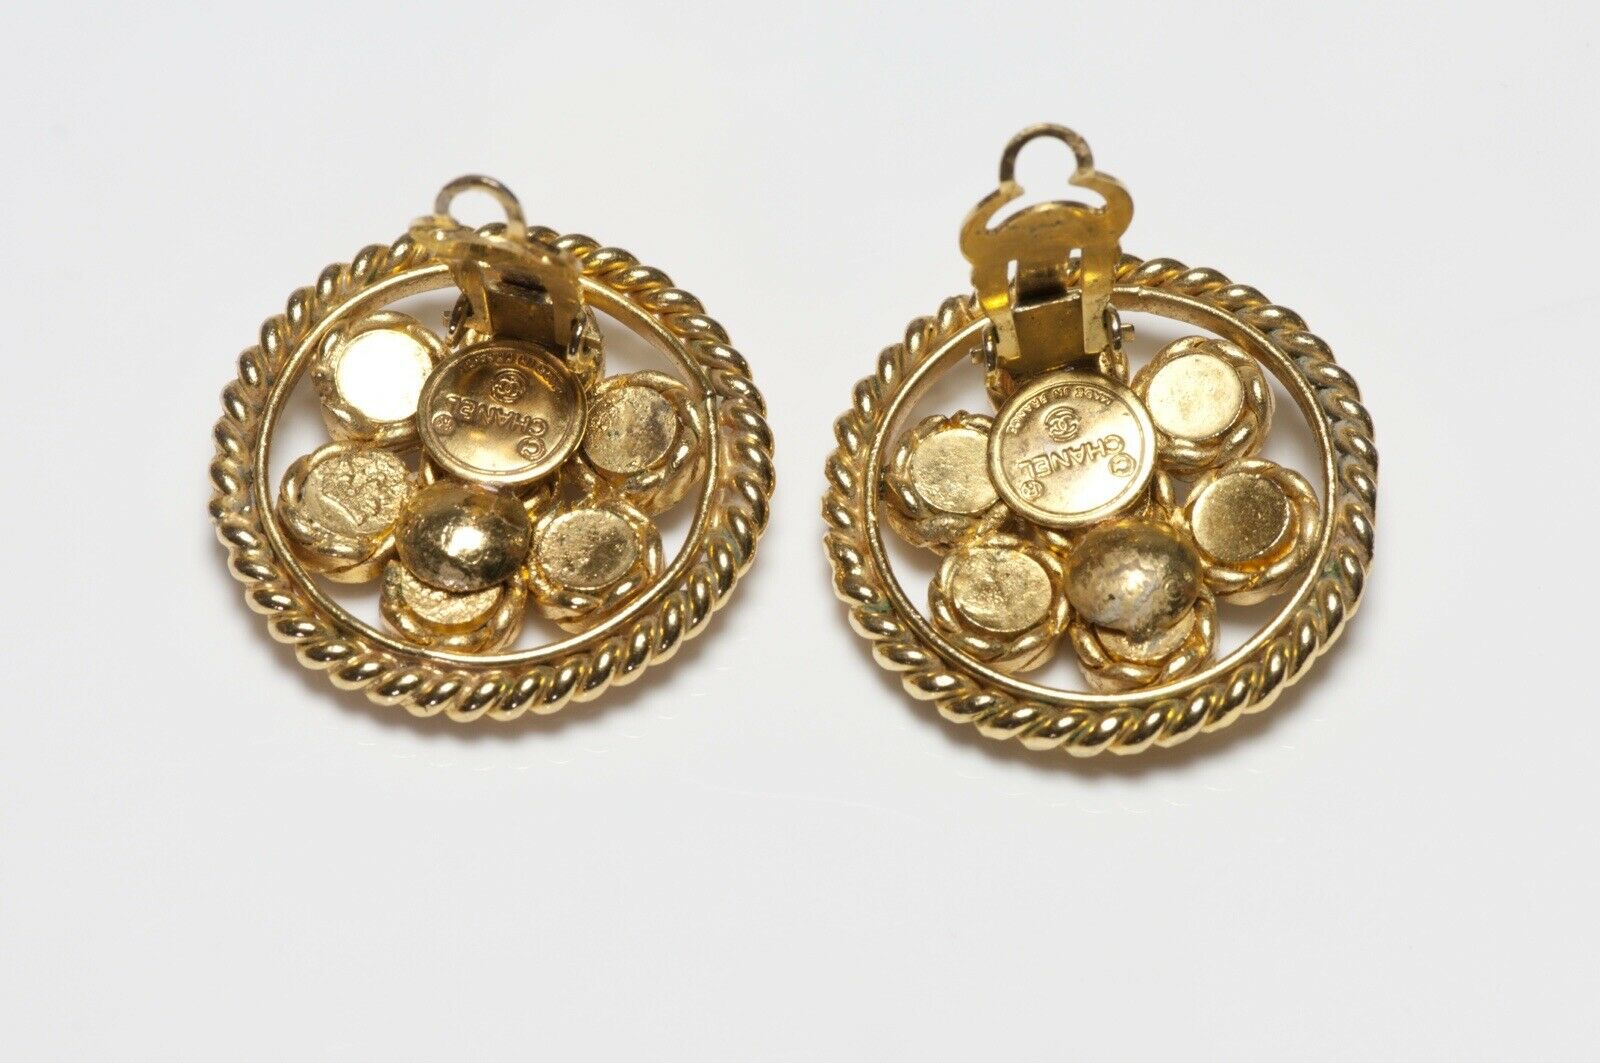 CHANEL Paris 1970’s Gold Plated Crystal Round Earrings